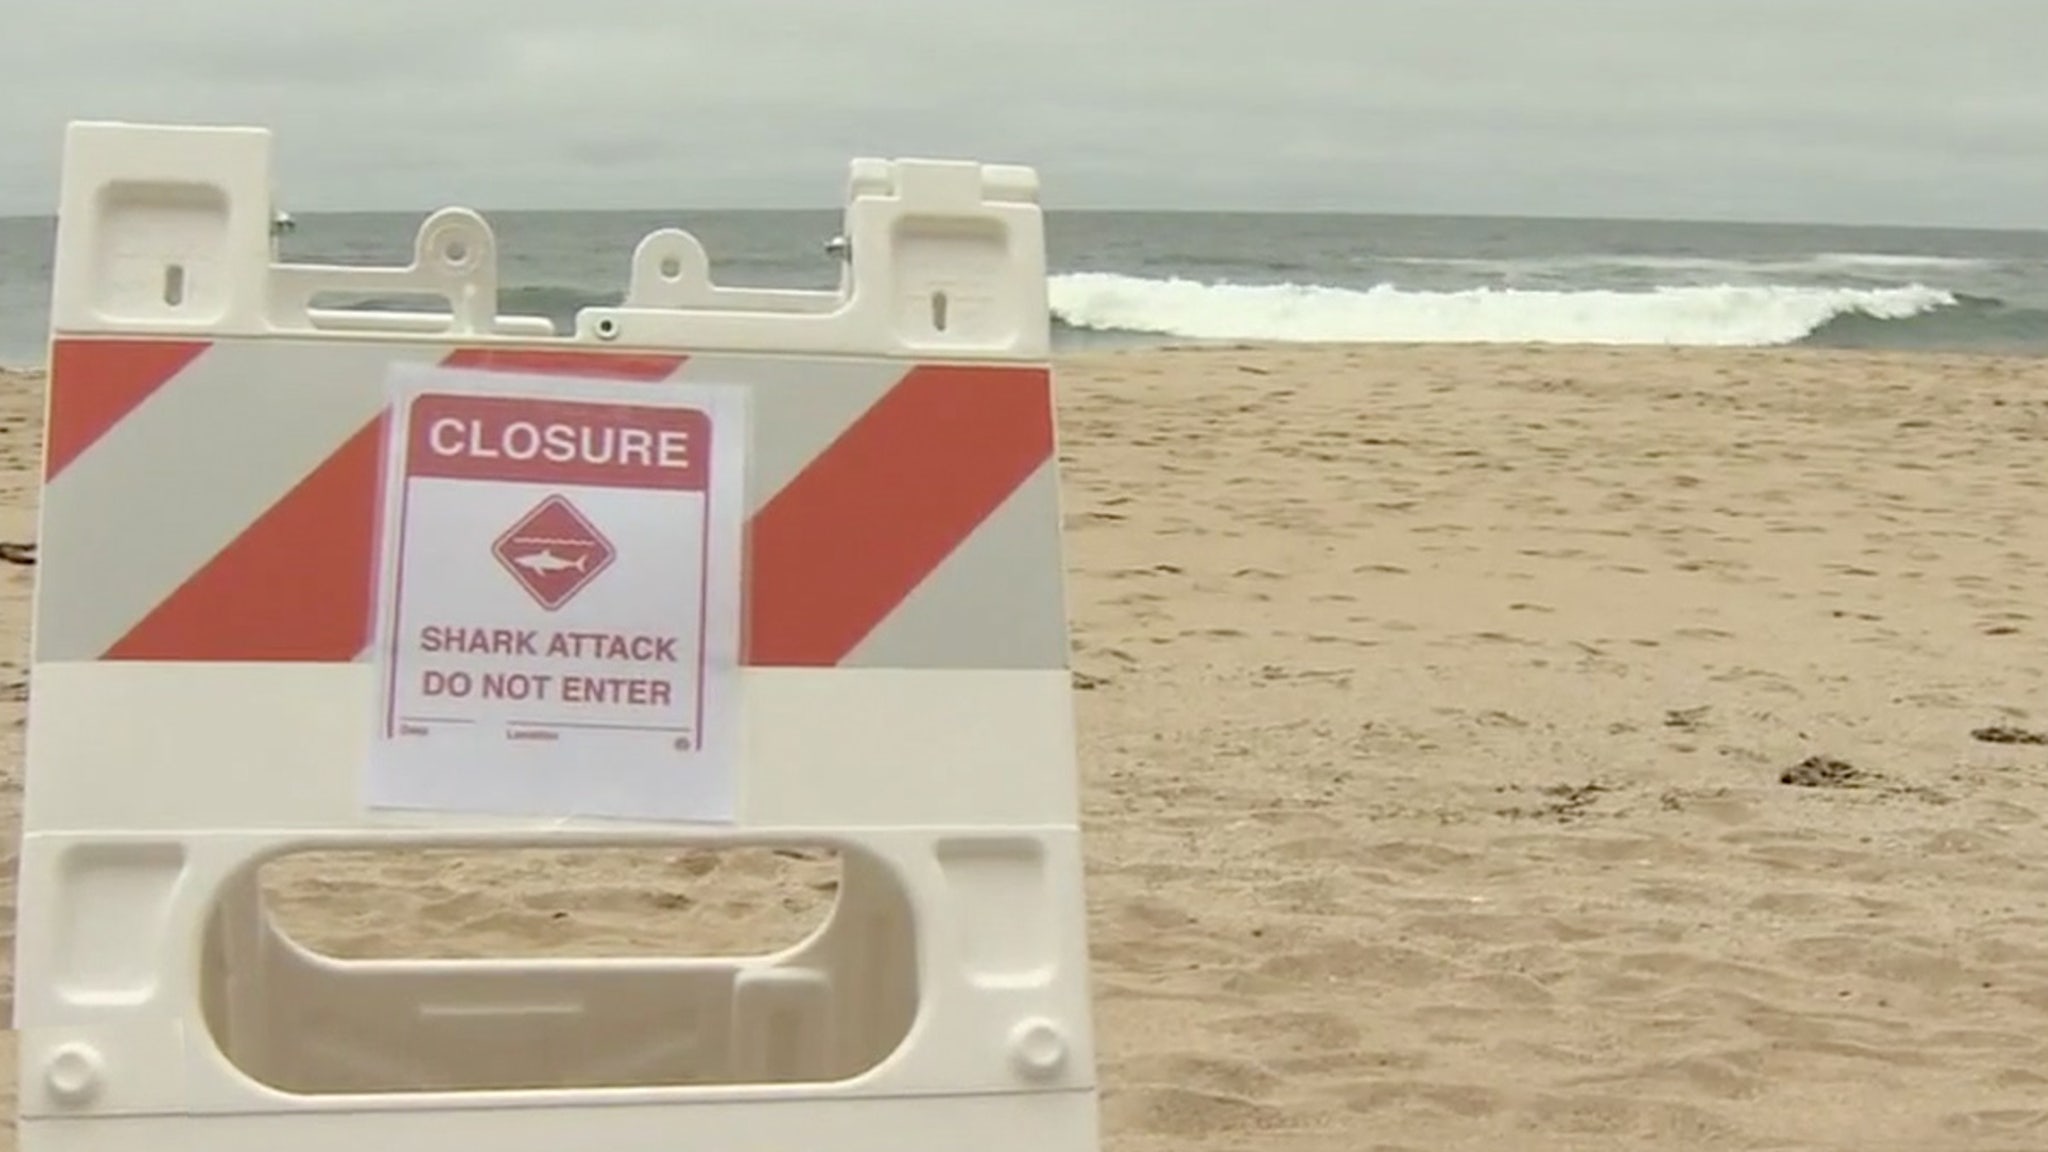 Surfer suffers leg injury in possible shark attack at beach near